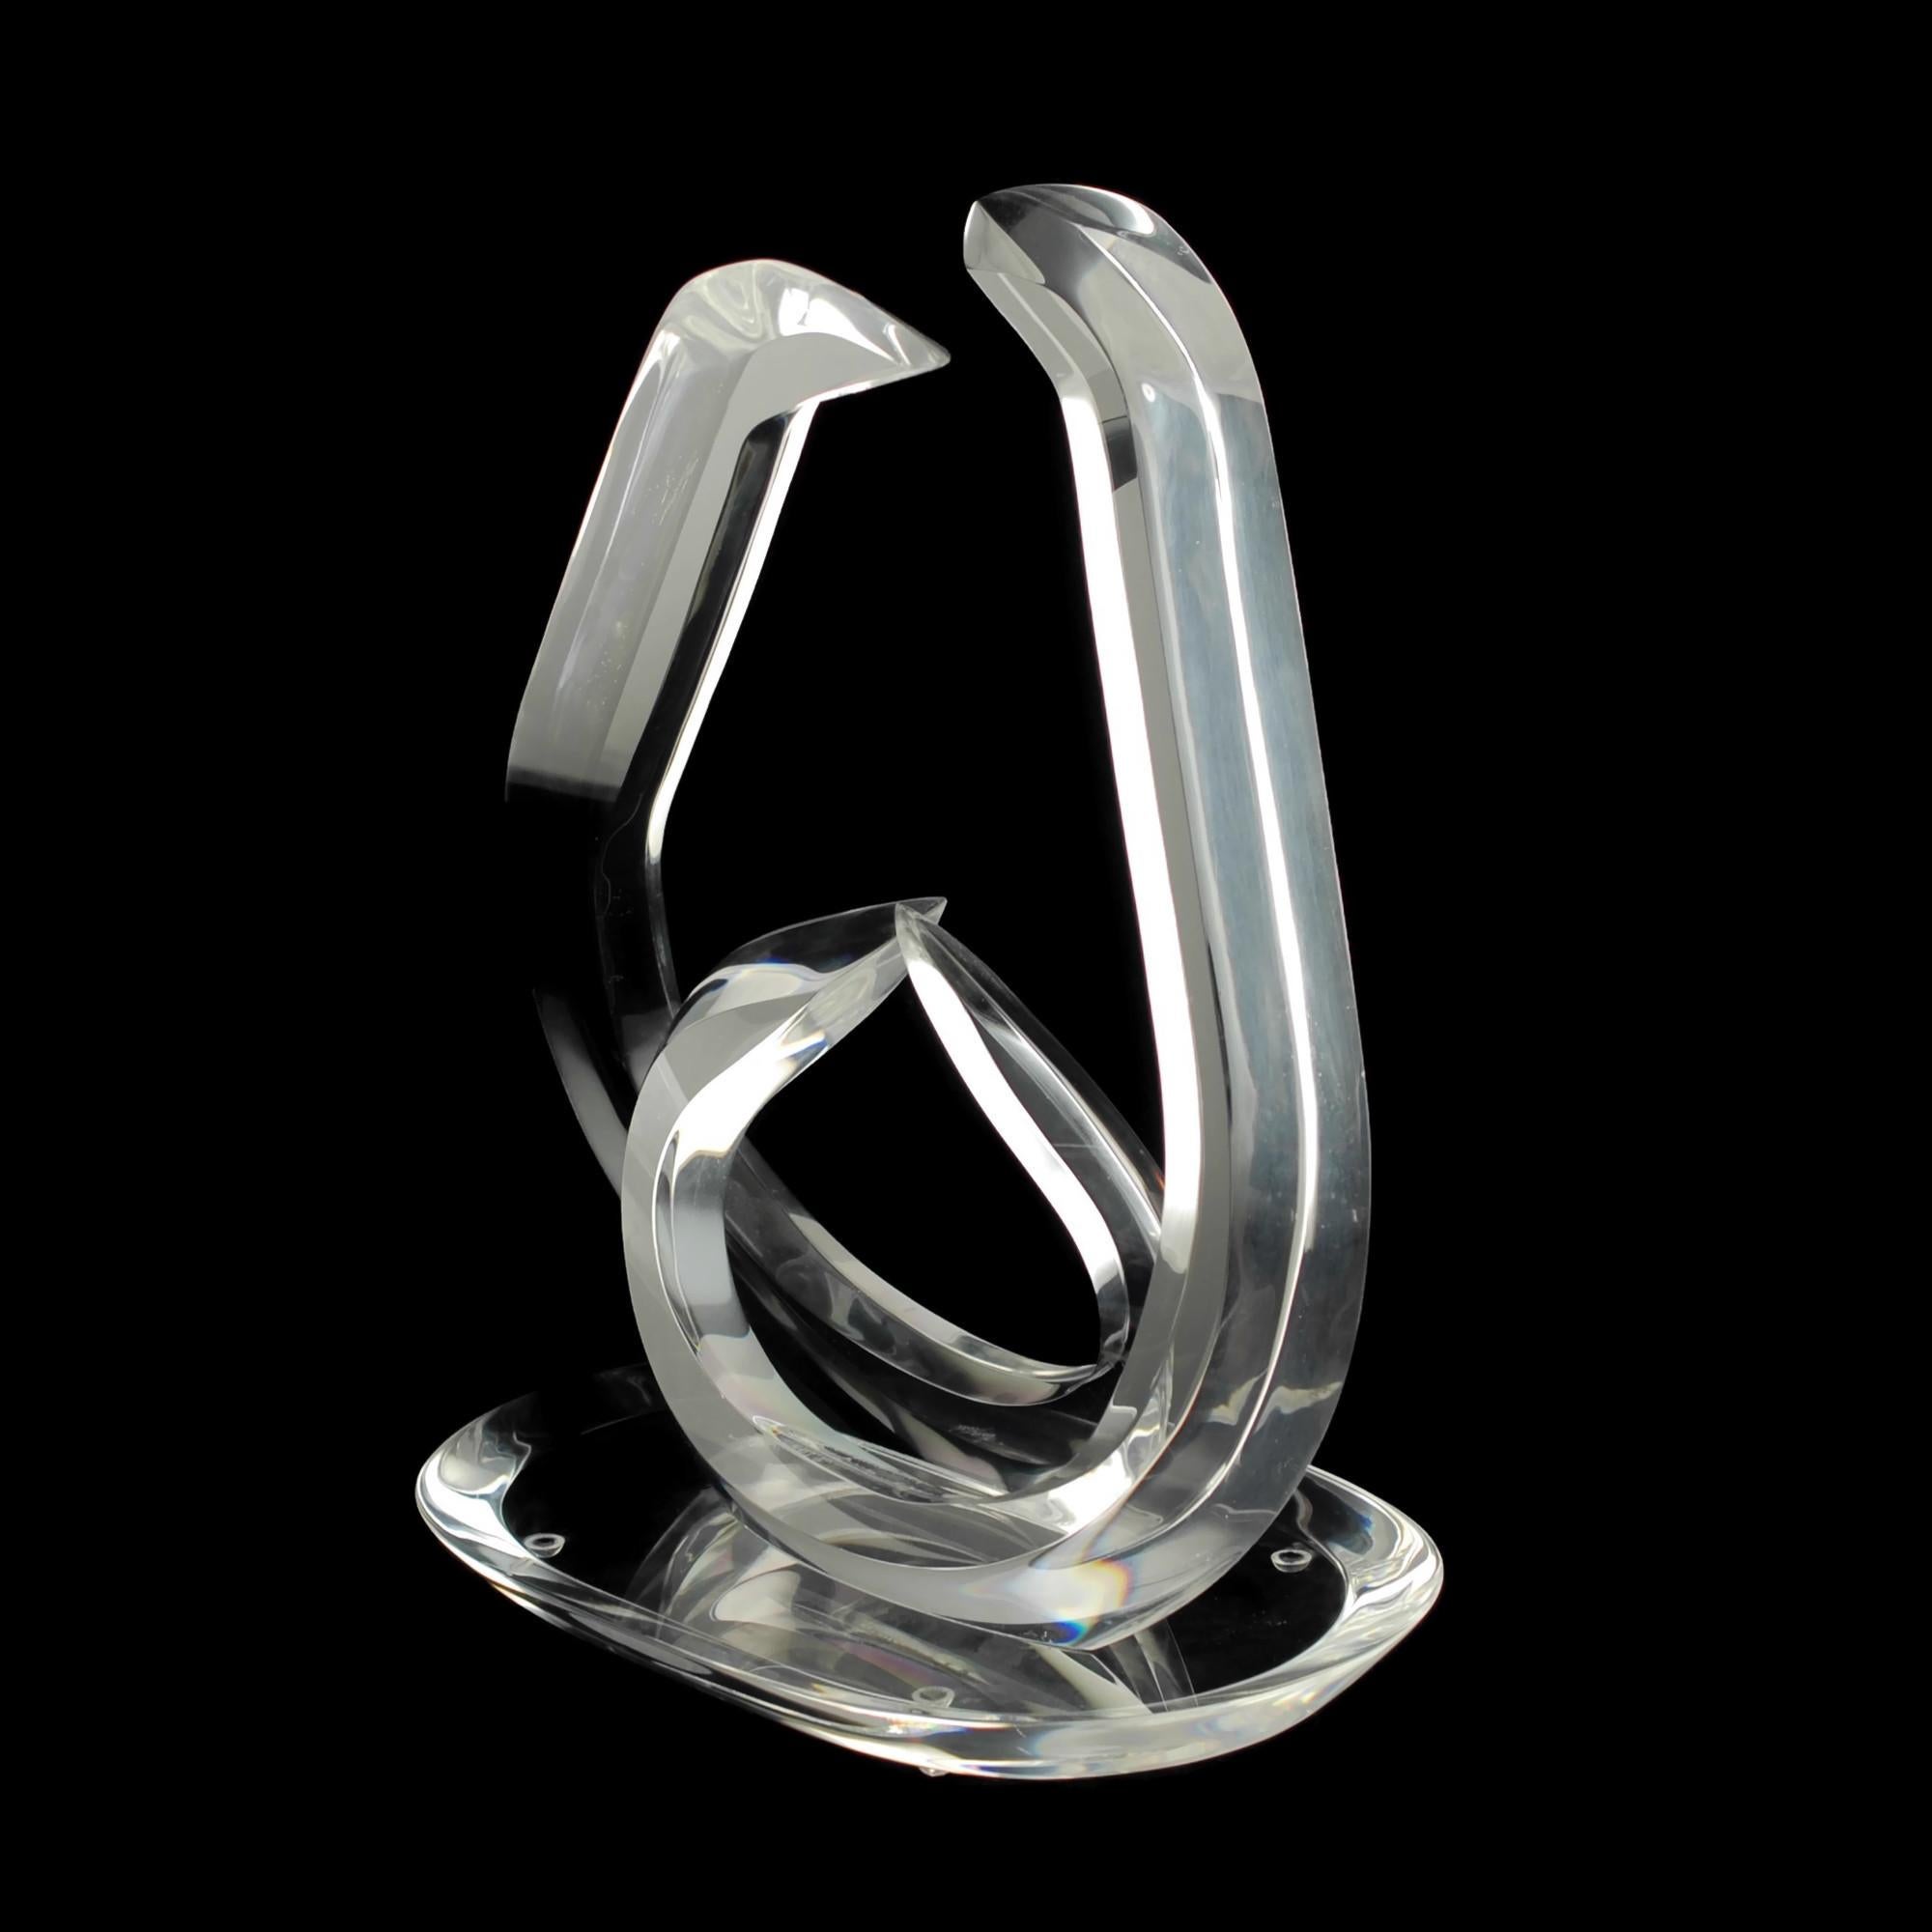 This modernist Hivo Van teal clear Lucite sculpture features two thick four-sided curved arm-like forms which terminate in sharp points. The arms are approximate mirror images of each other and are positioned side by side with their bodies angled